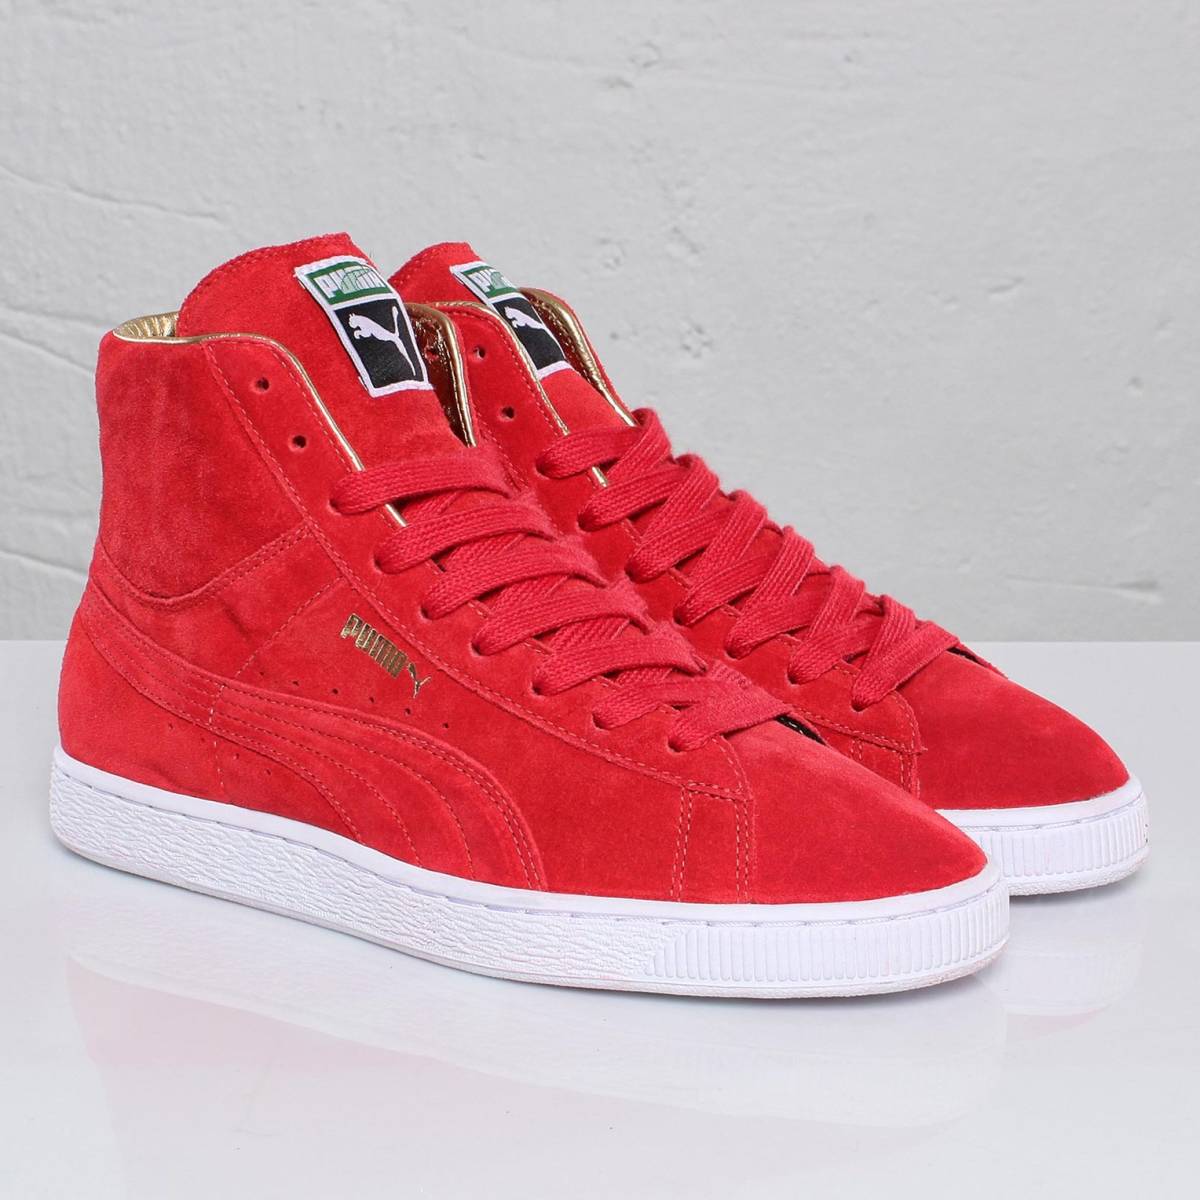 PUMA Golden Classic Pack Suede Mid 352484-01 Team Regal Red Gold プーマ ゴールデン クラシック スエード ミッド レッド UNDEFEATED 90_画像1